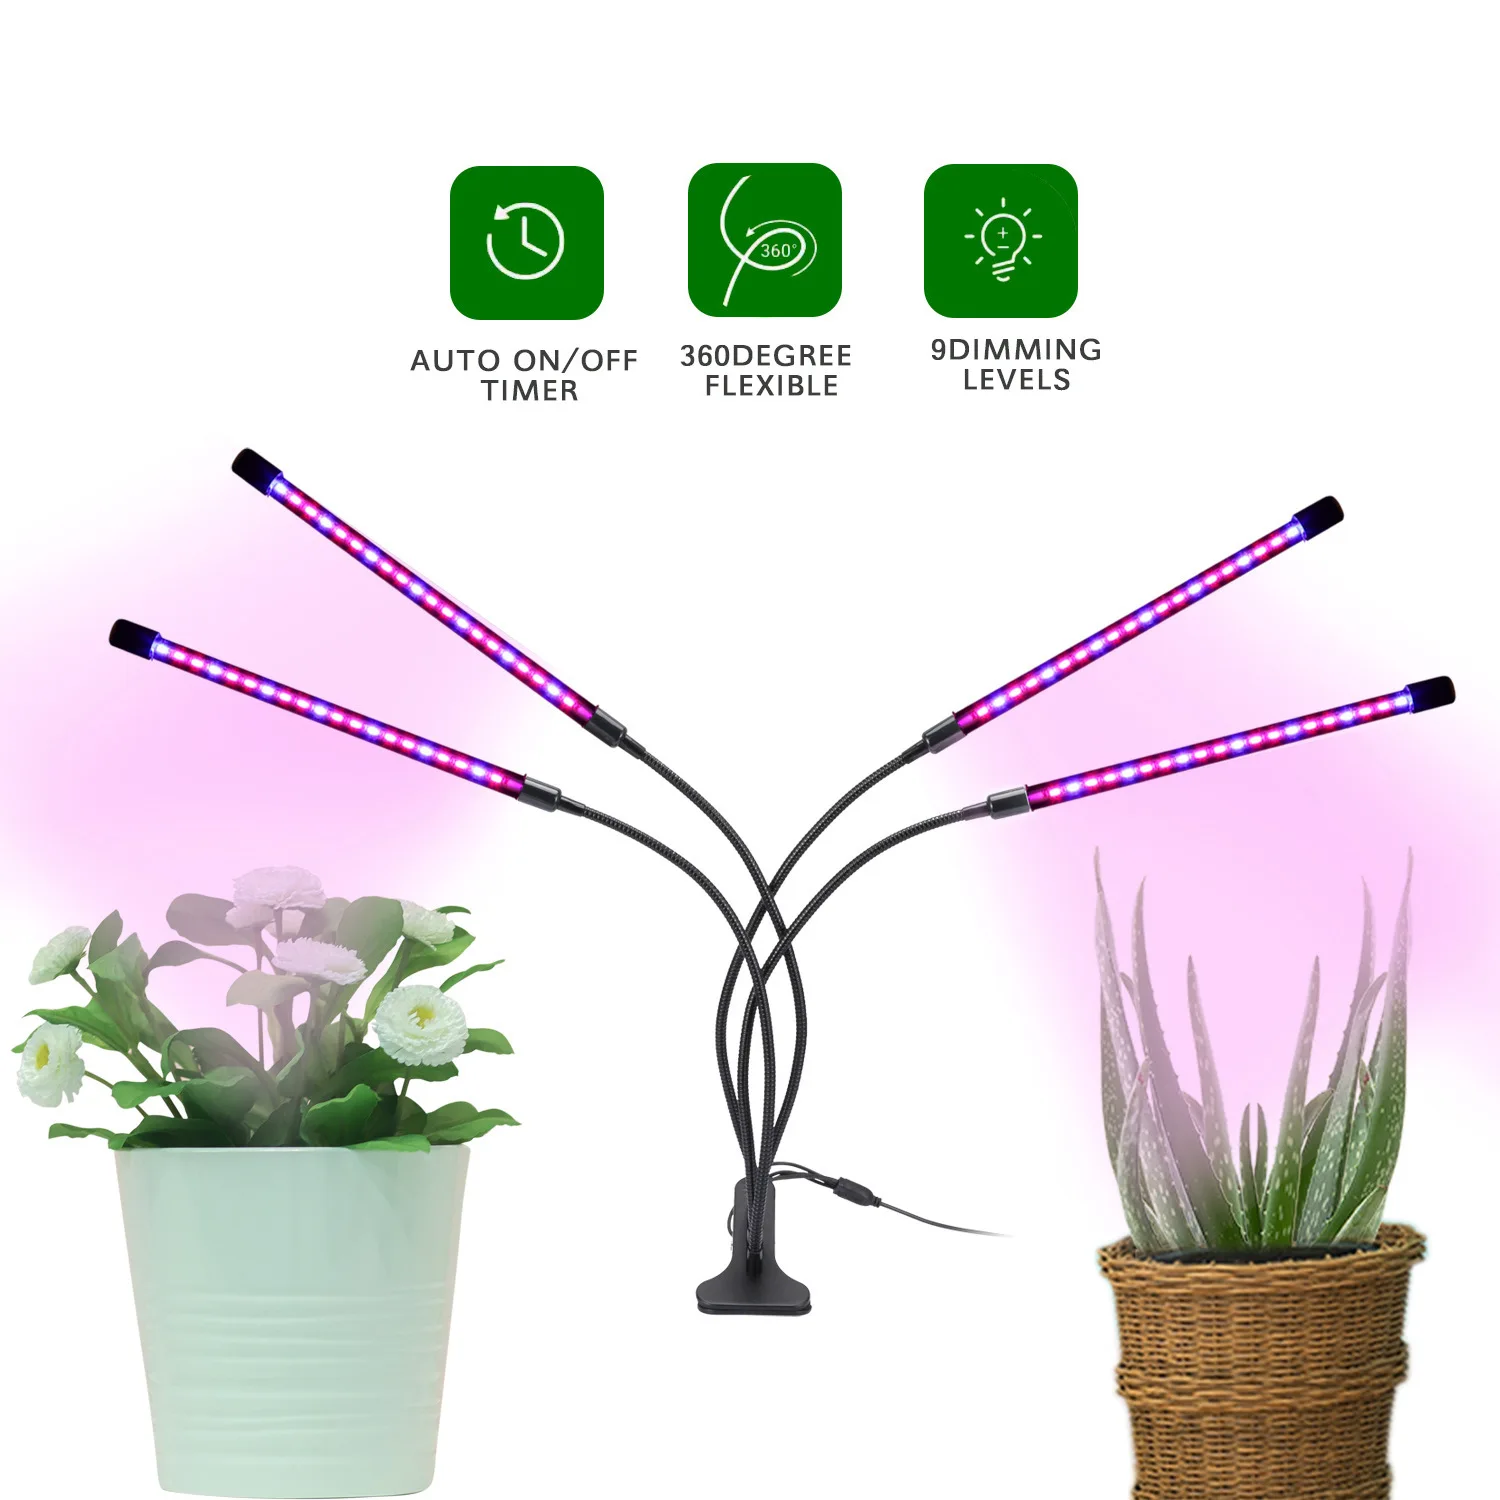 

USB LED Plant Grow Light Indoor Garden 10 Dimmable Levels Grow Light Full Spectrum Setting Hydroponic Greenhouse Timer 3H/9H/12H